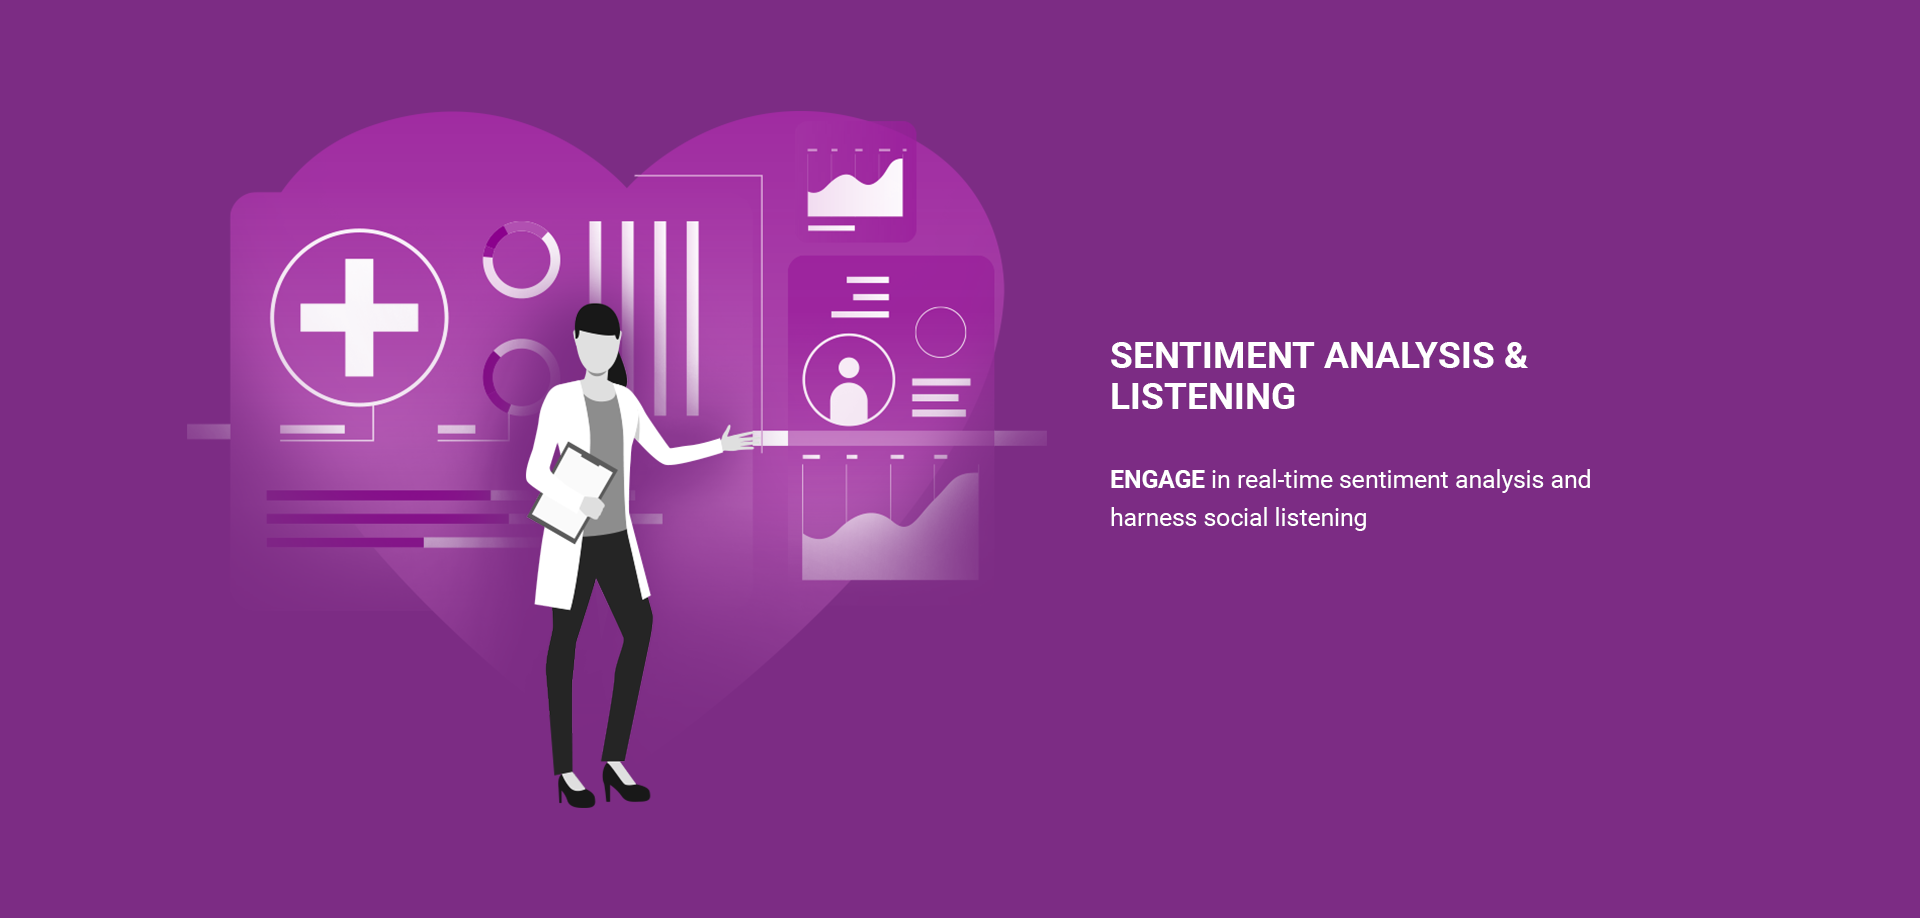 Purple graphic showcasing a physician in front of a heart shape filled with various icons like charts, graphs, and a plus sign, with the text "SENTIMENT ANALYSIS & LISTENING" beside it.